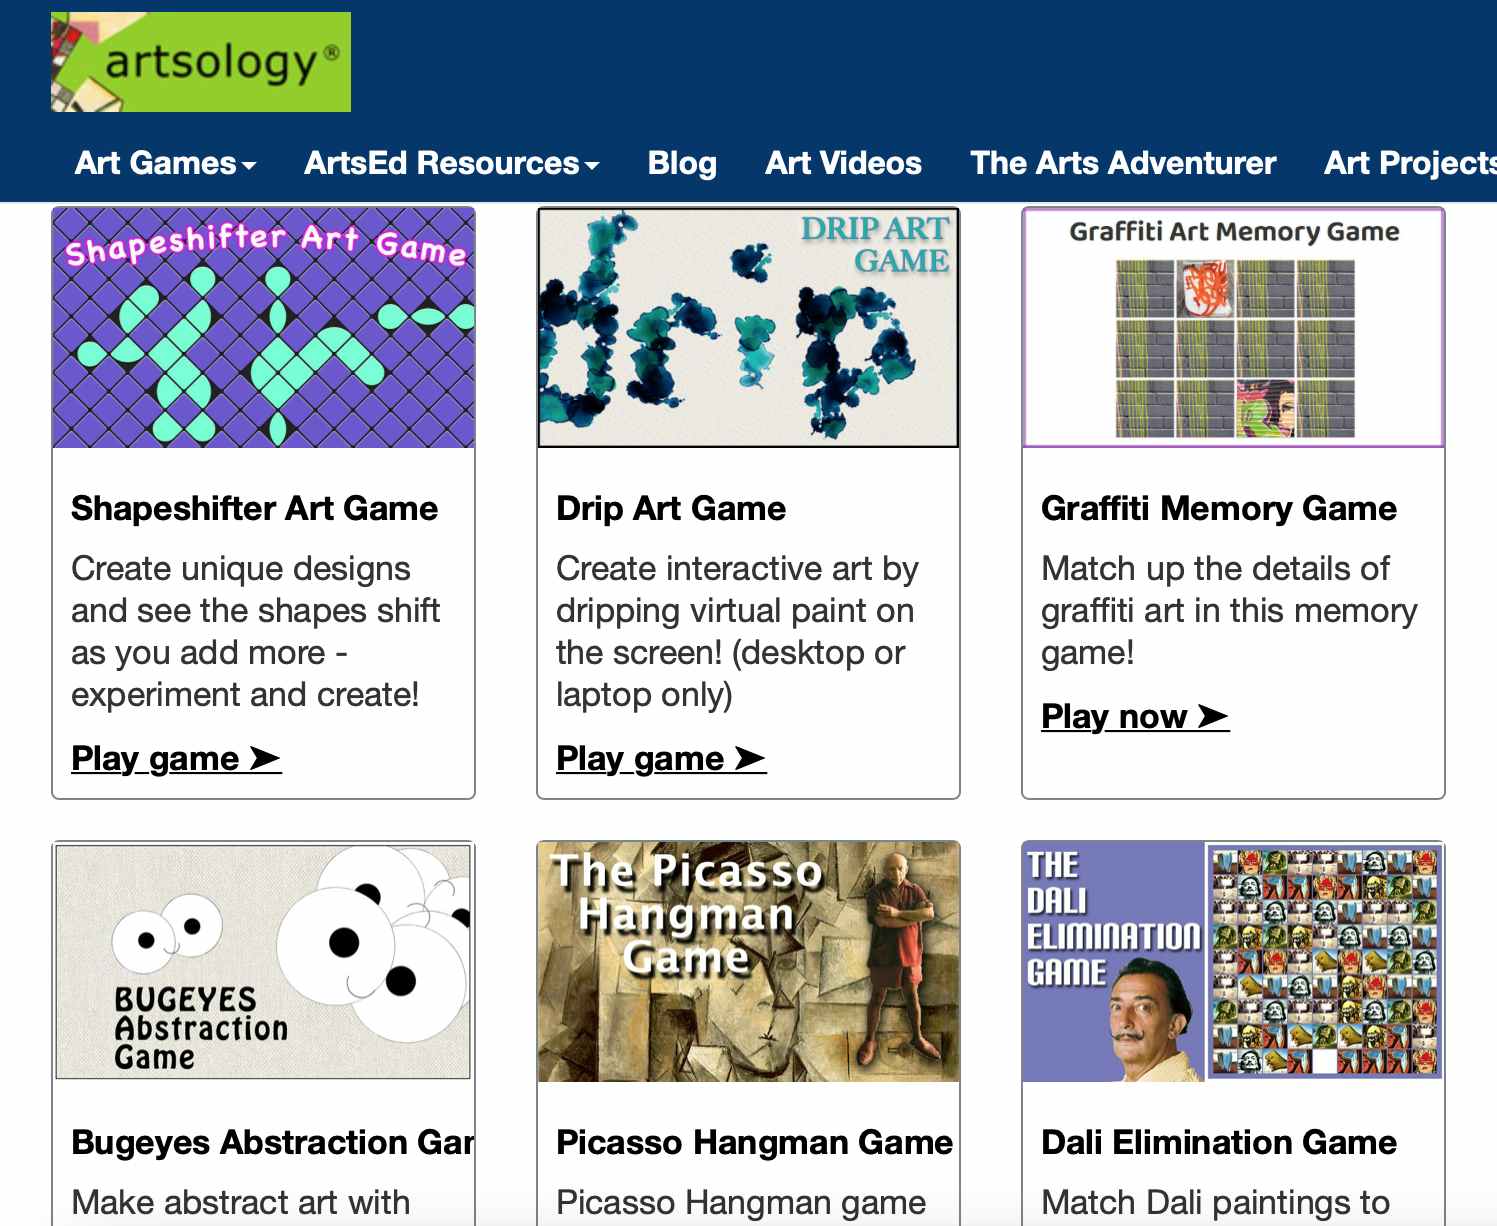 A screenshot of an Artsology webpage with art games for kids.